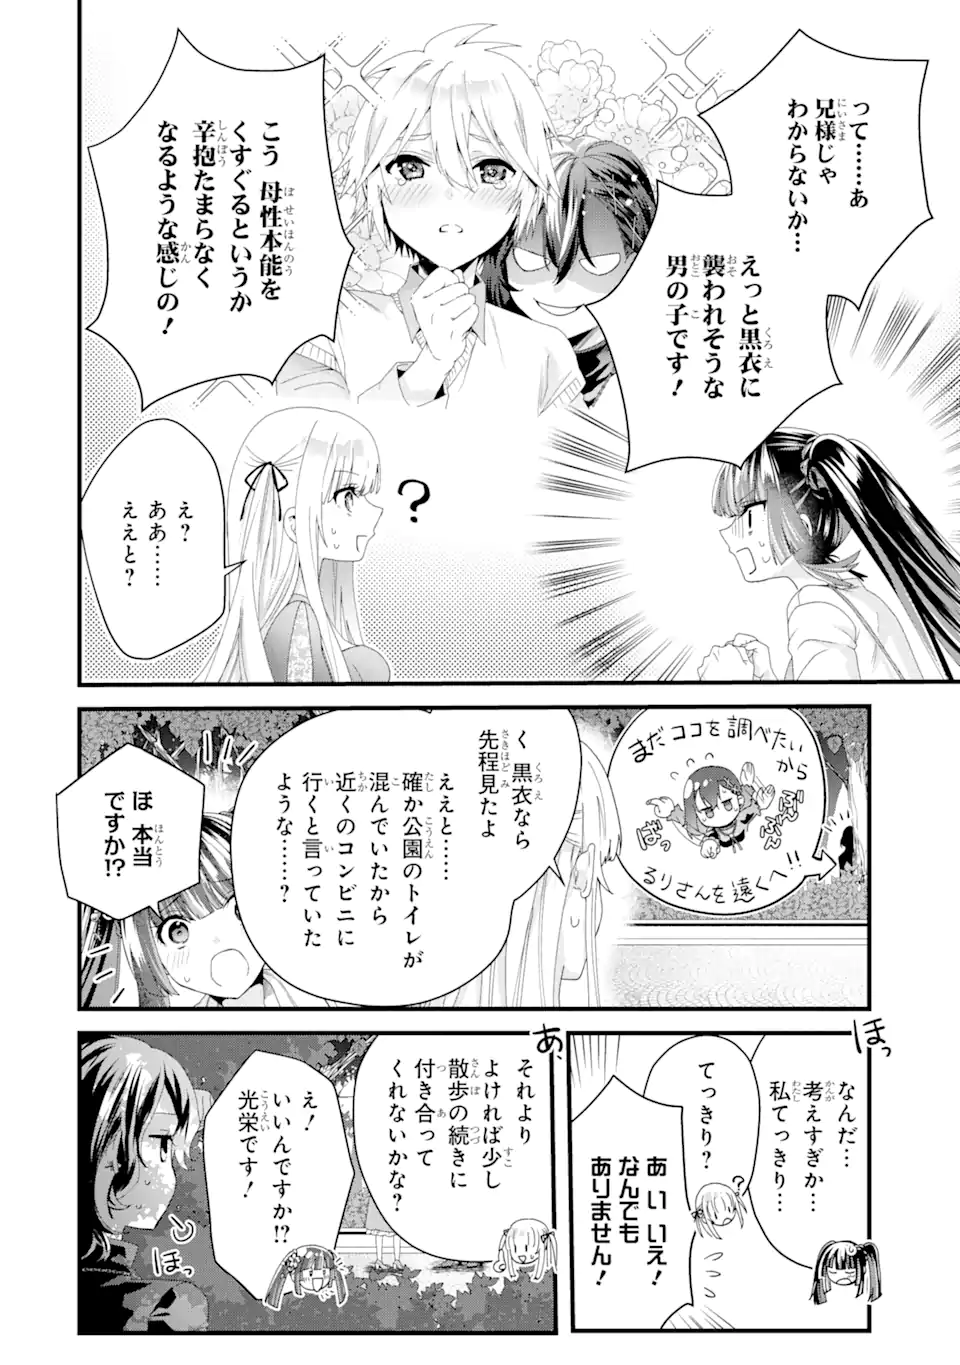 Ousama no Propose - Chapter 10.3 - Page 2